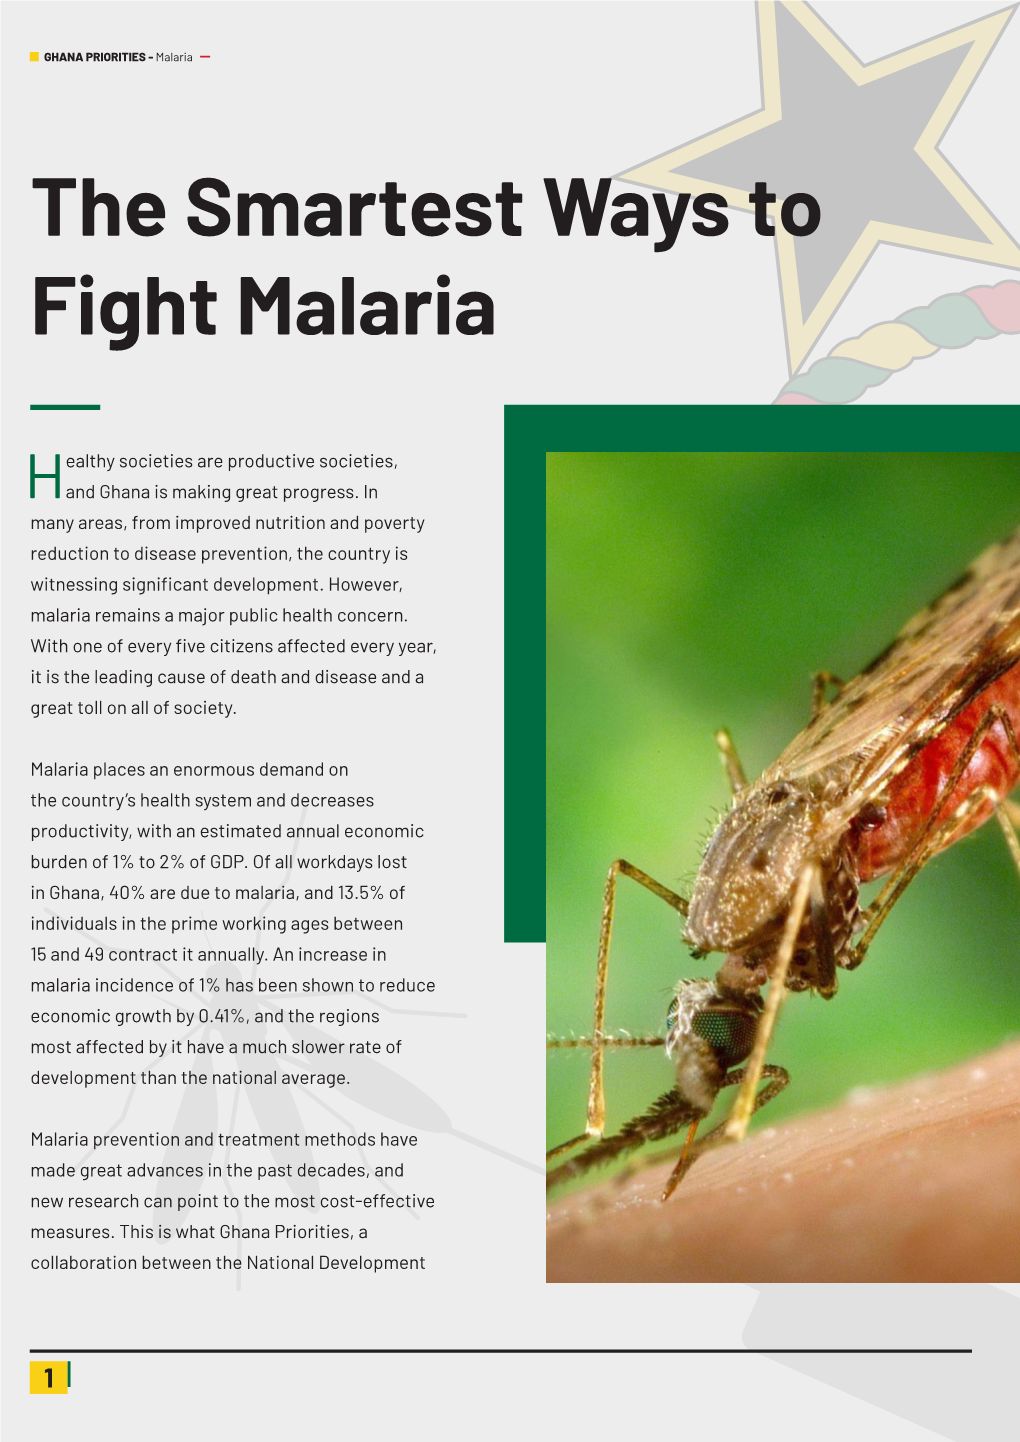 The Smartest Ways to Fight Malaria